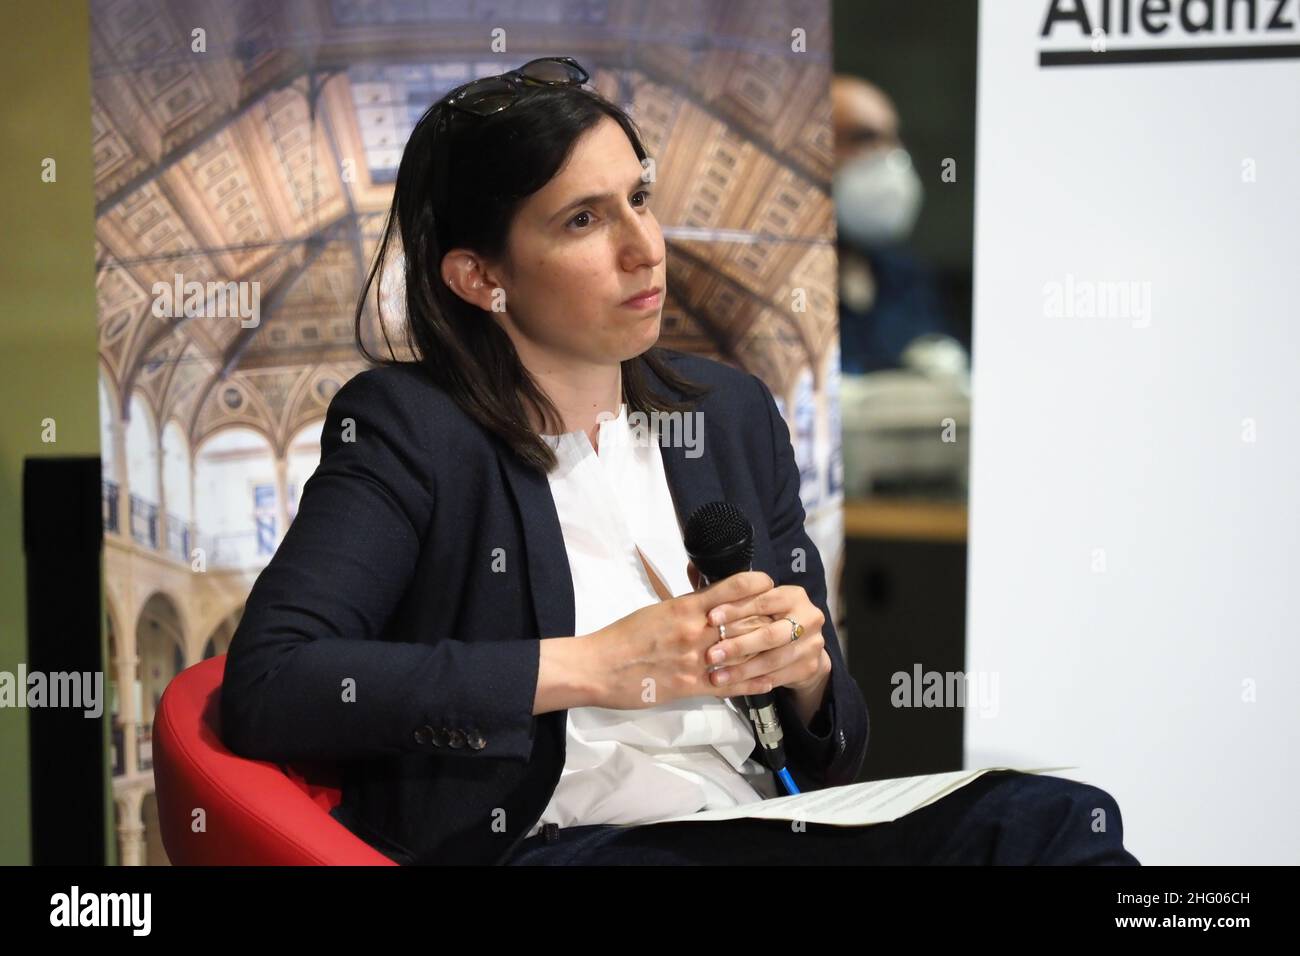 Michele Nucci/LaPresse June 29, 2021 - Bologna, Italy - news in the pic: Presentation of the new book by the secretary of the PD Enrico Letta with vice president of the Emilia Romagna region Elly Schlein in the Sala Borsa Stock Photo